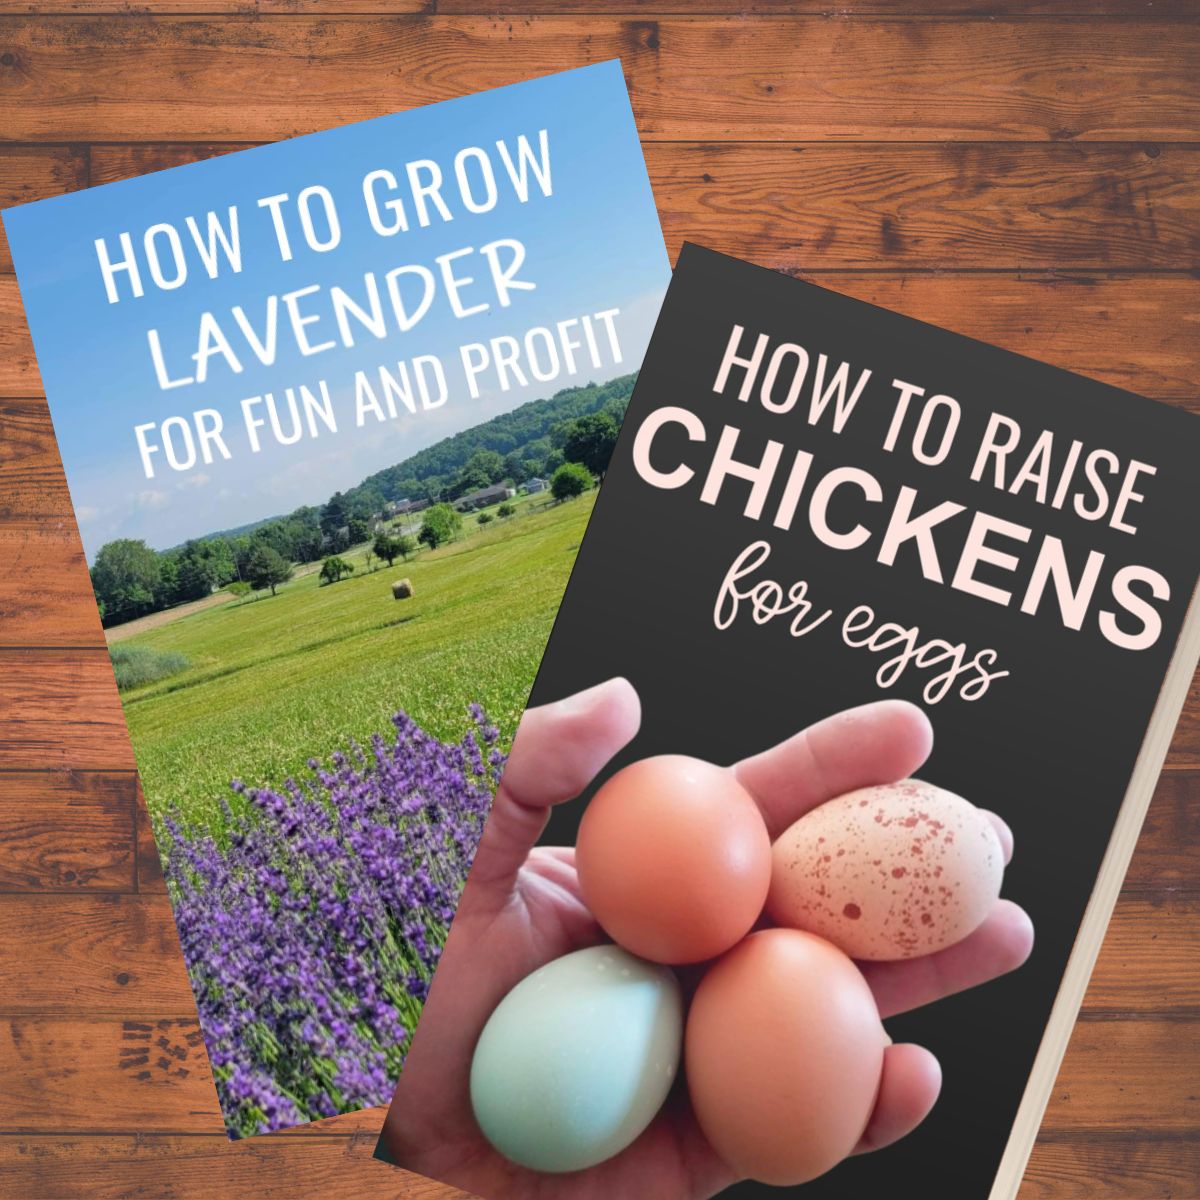 A book about planting lavender and book about raising chickens. 